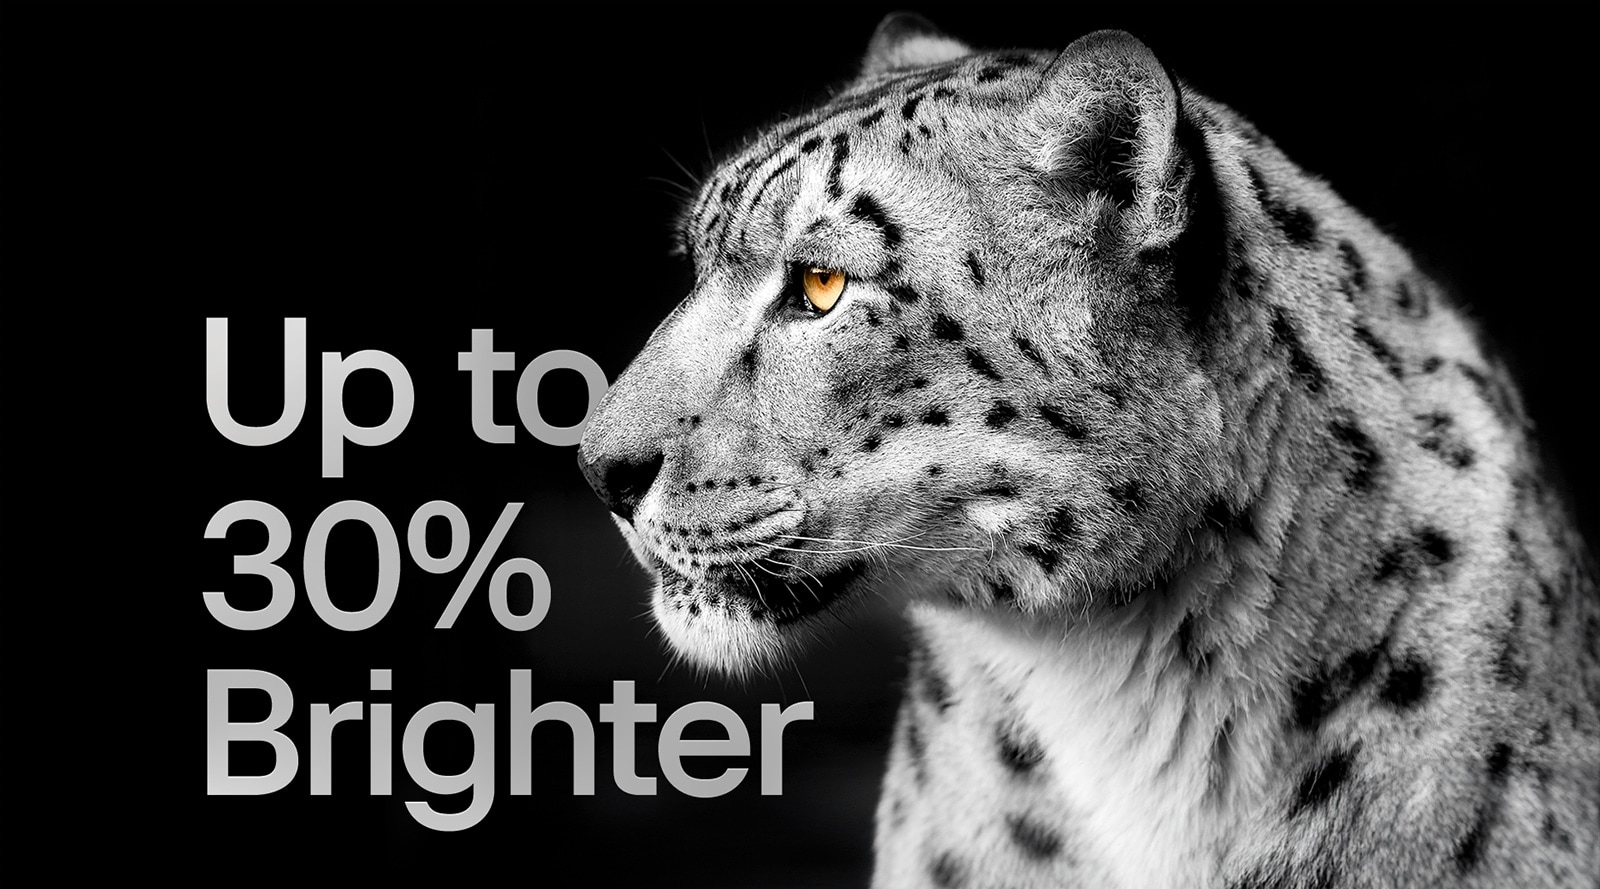 A white leopard showing its side face on the left side of the image. The words "Up to 30% brighter" appear on the left.